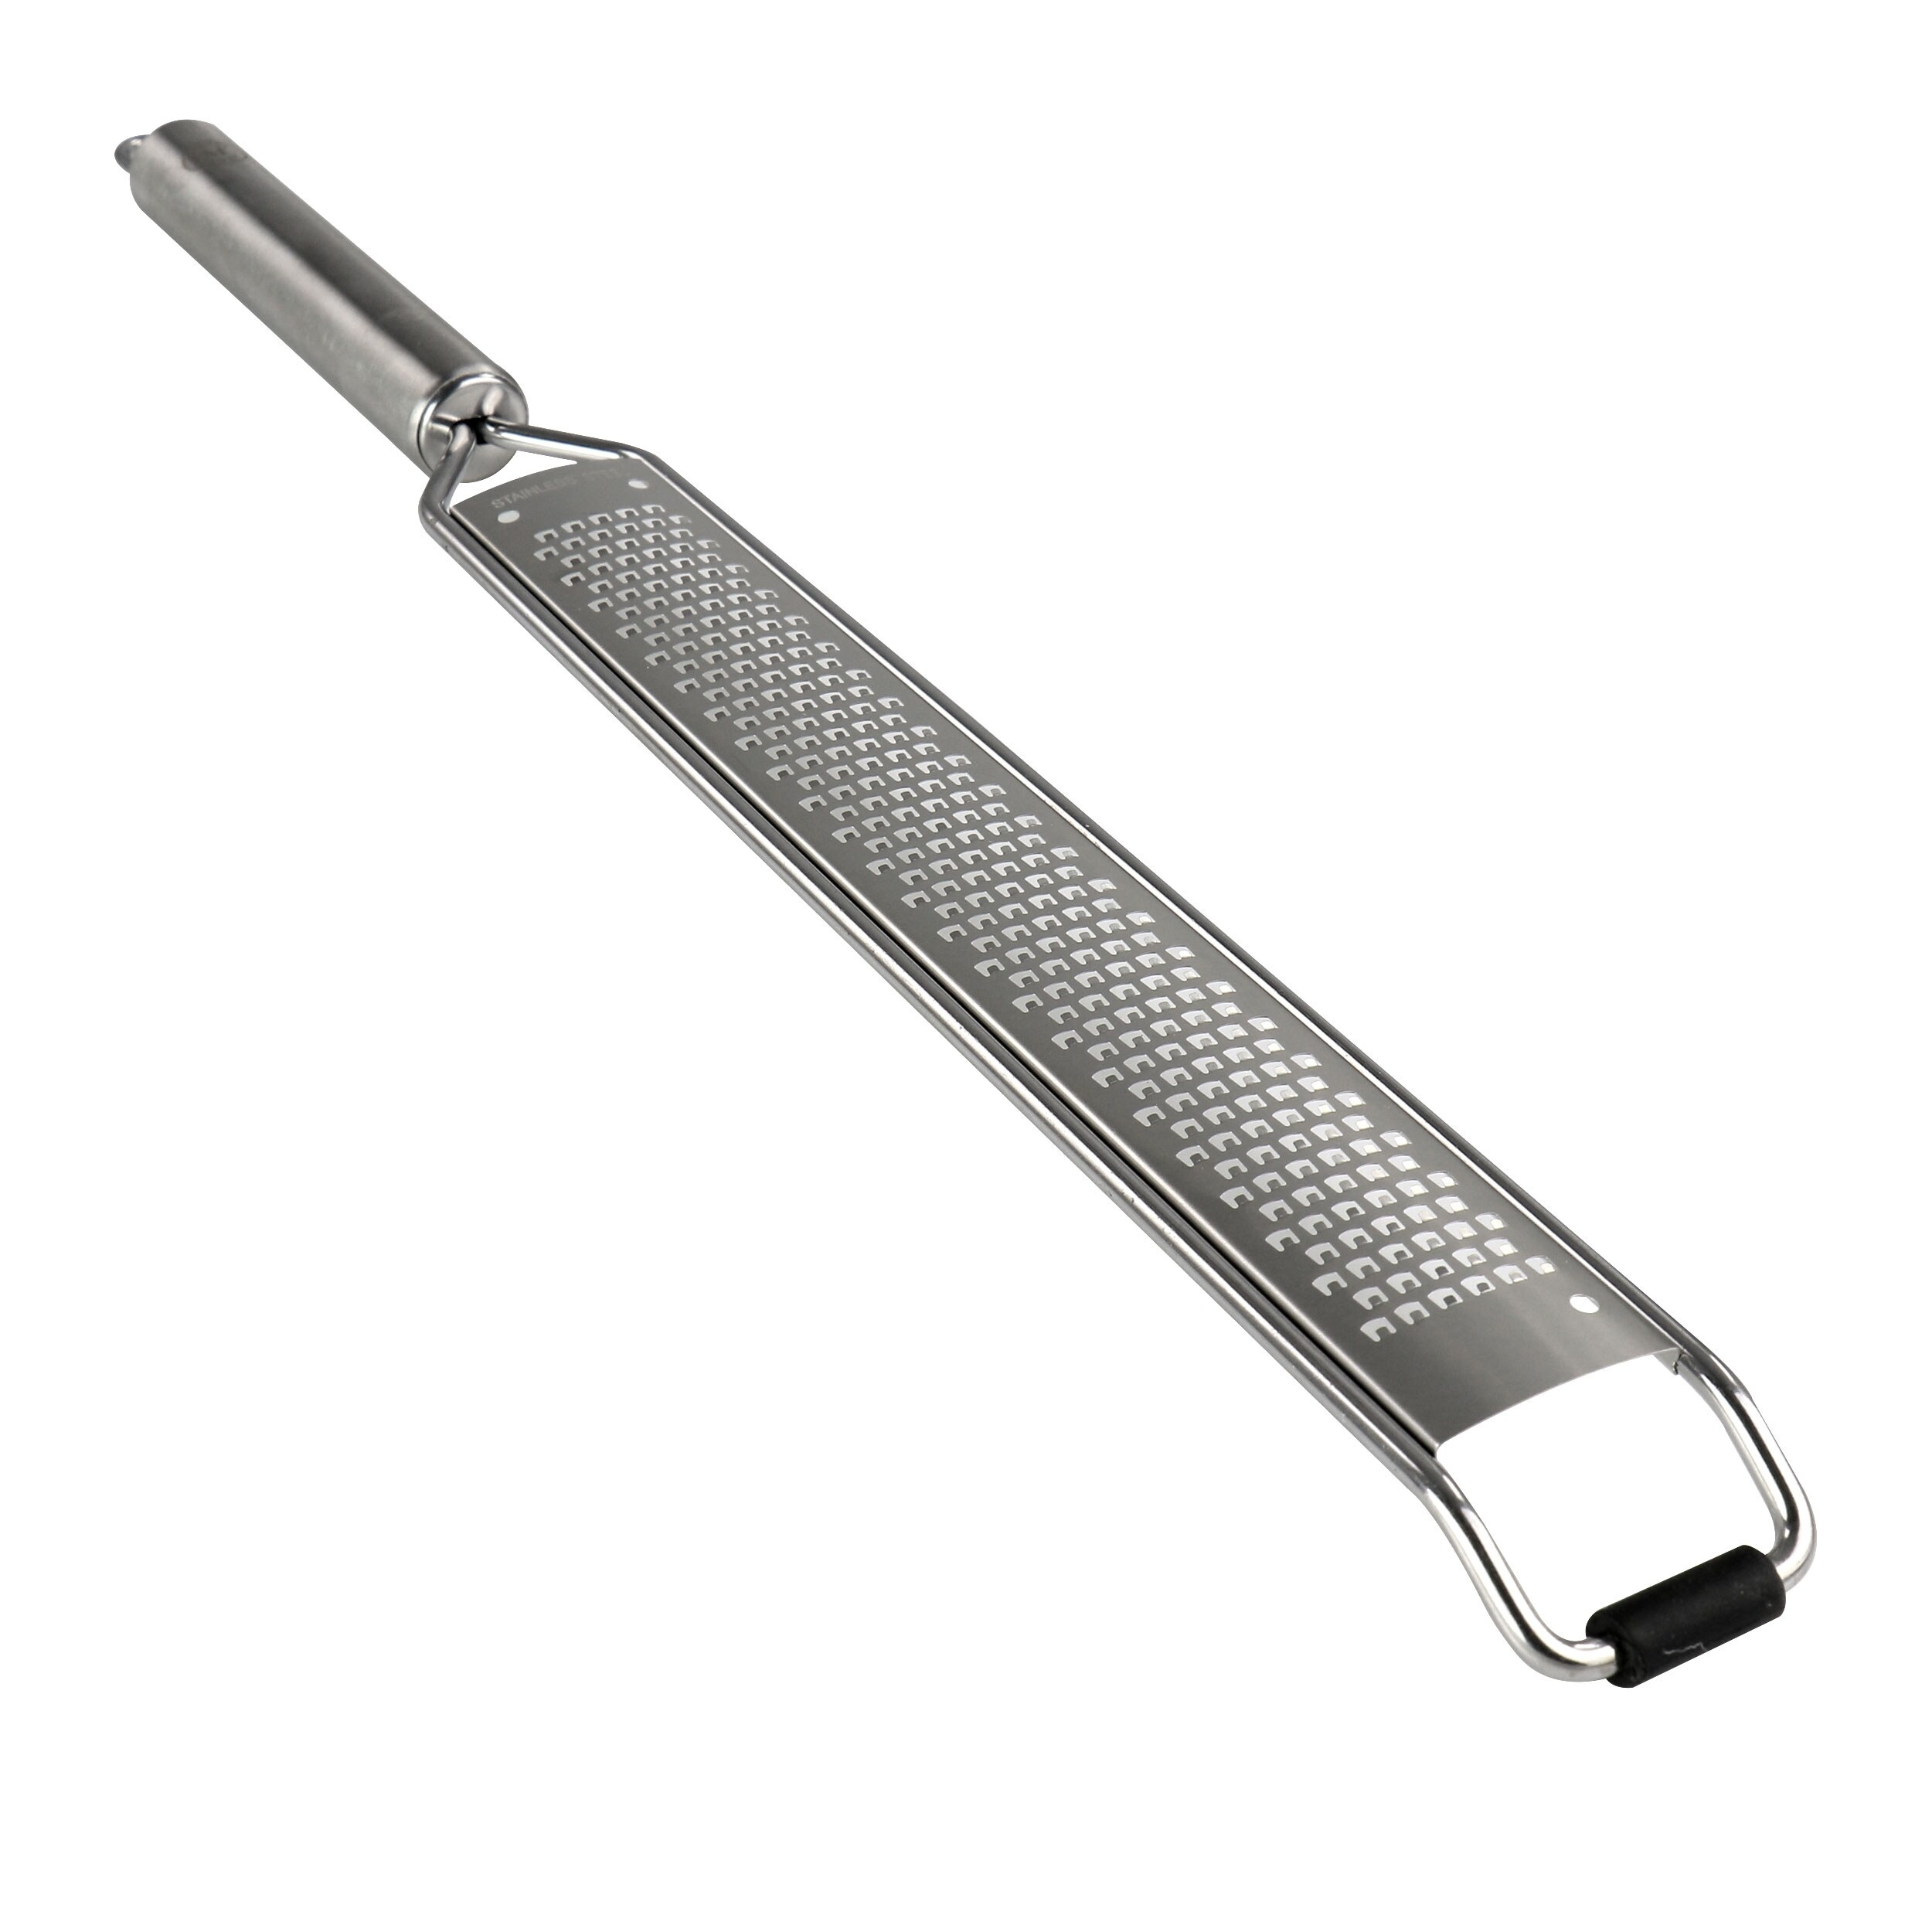 https://ak1.ostkcdn.com/images/products/is/images/direct/c0291c3985b4c3b24411a471db98954d978aa2f2/Martha-Stewart-Stainless-Steel-Long-Grater.jpg